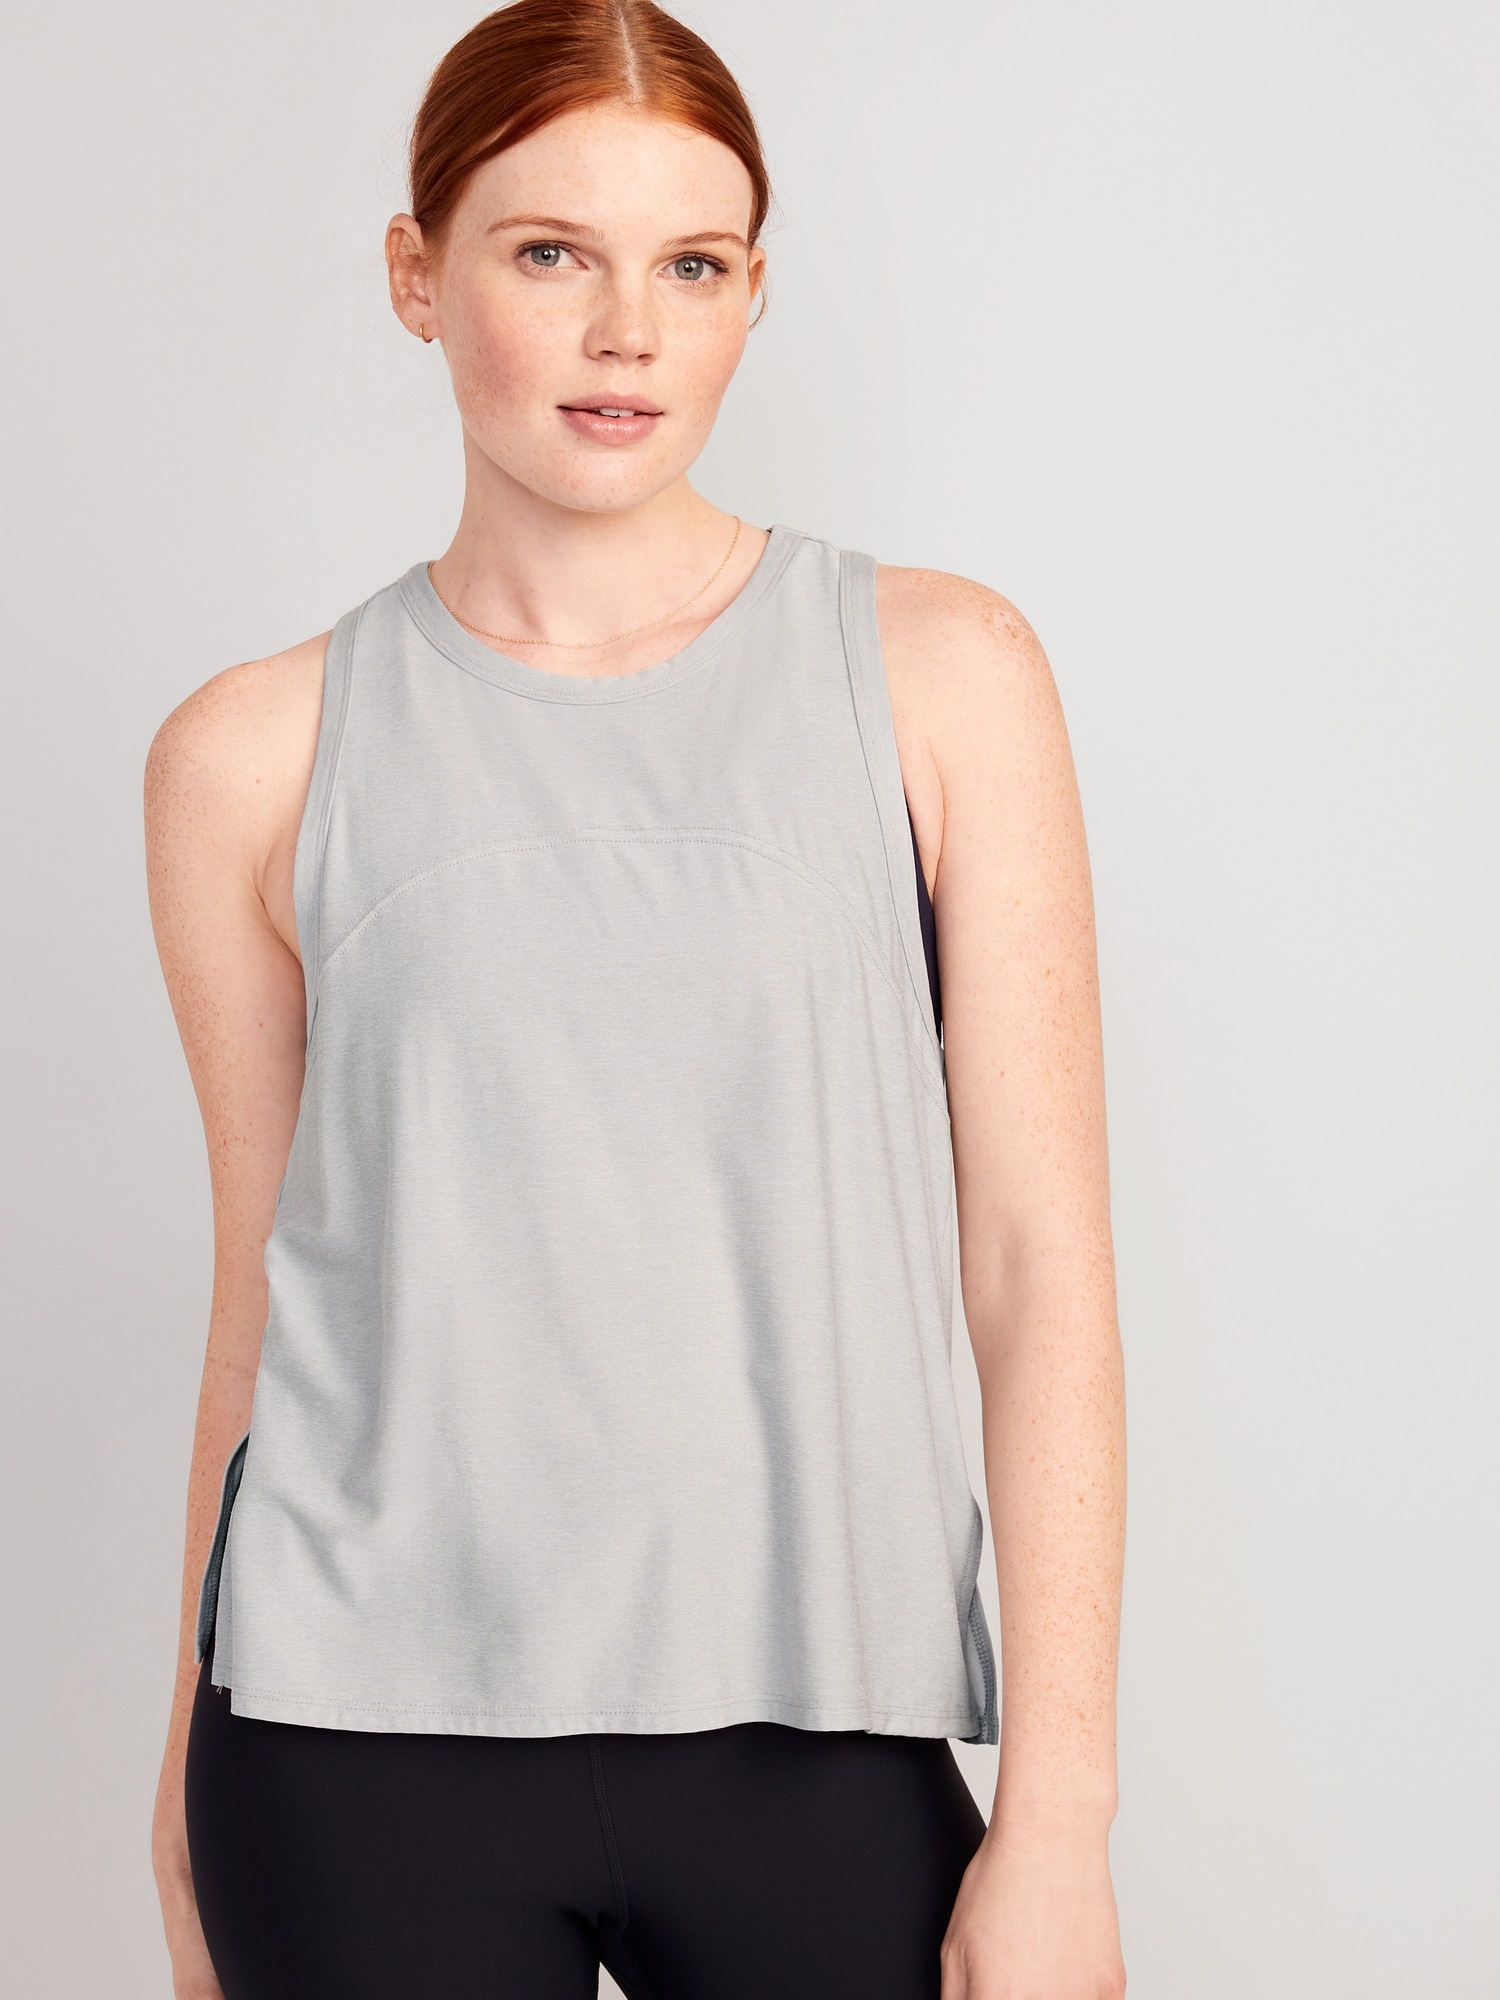 Women's Loose Fit Tank Tops | Old Navy